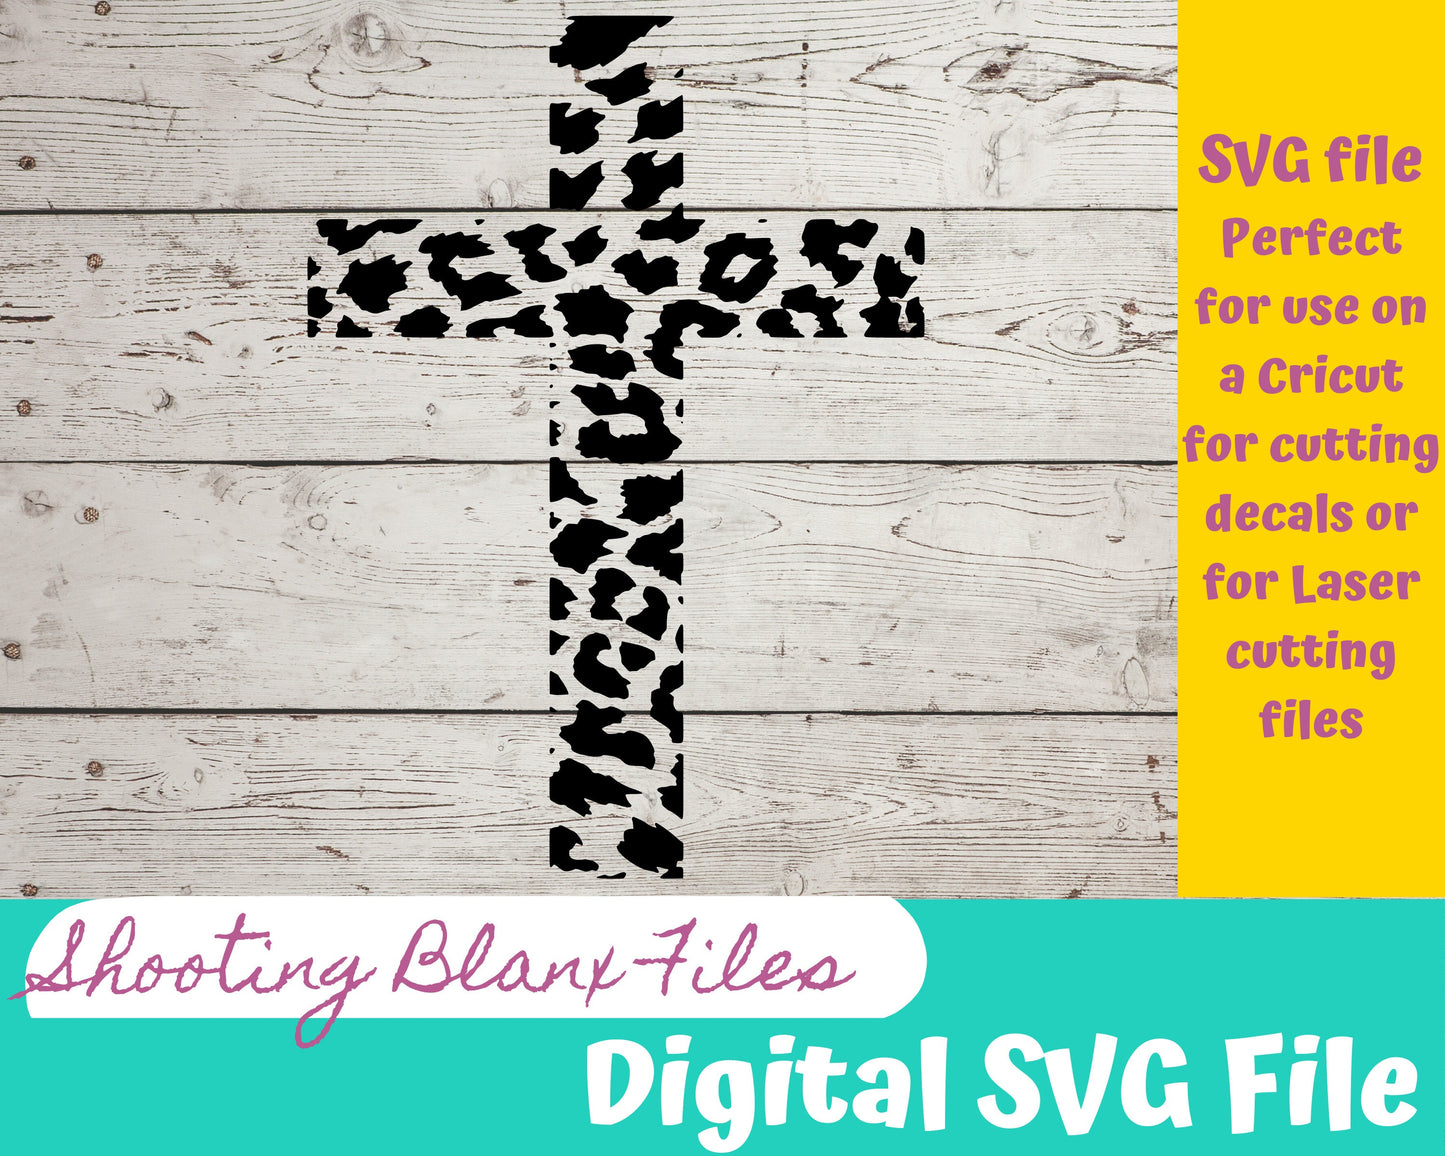 Animal Print Cross SVG files perfect for Cricut, Cameo, or Silhouette also for laser engraving Glowforge, tumbler, Chaeta, Leopard